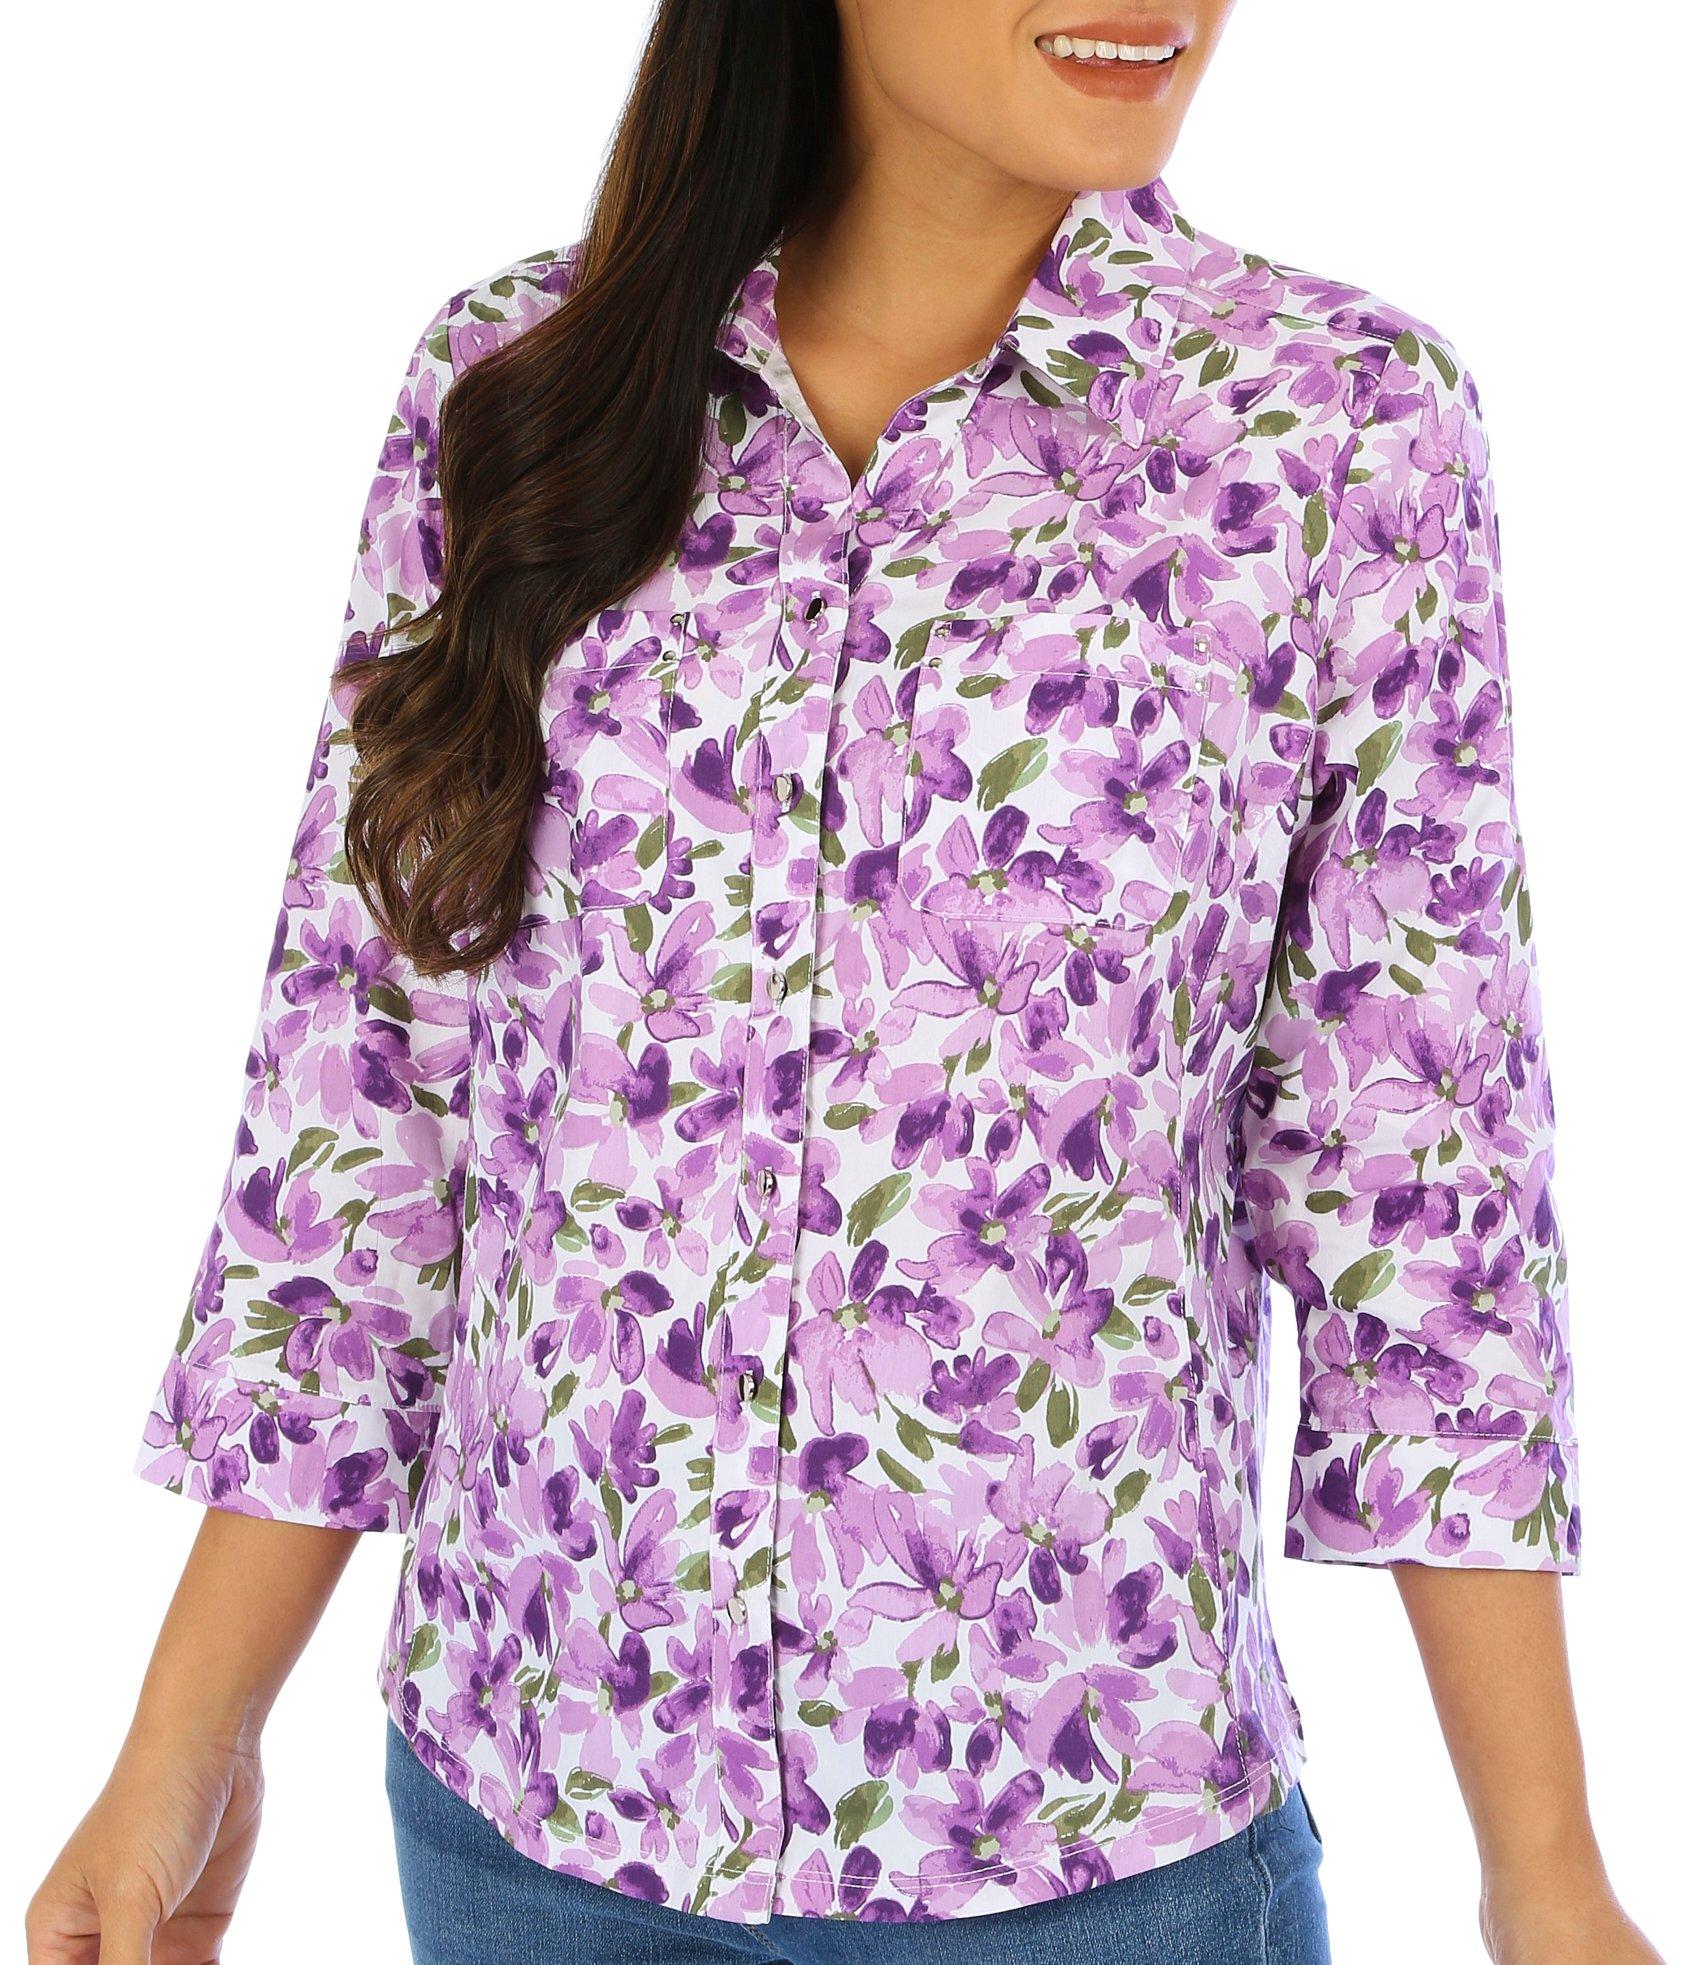 Coral Bay Womens Violet Print Knit To Fit 3/4 Sleeve Top